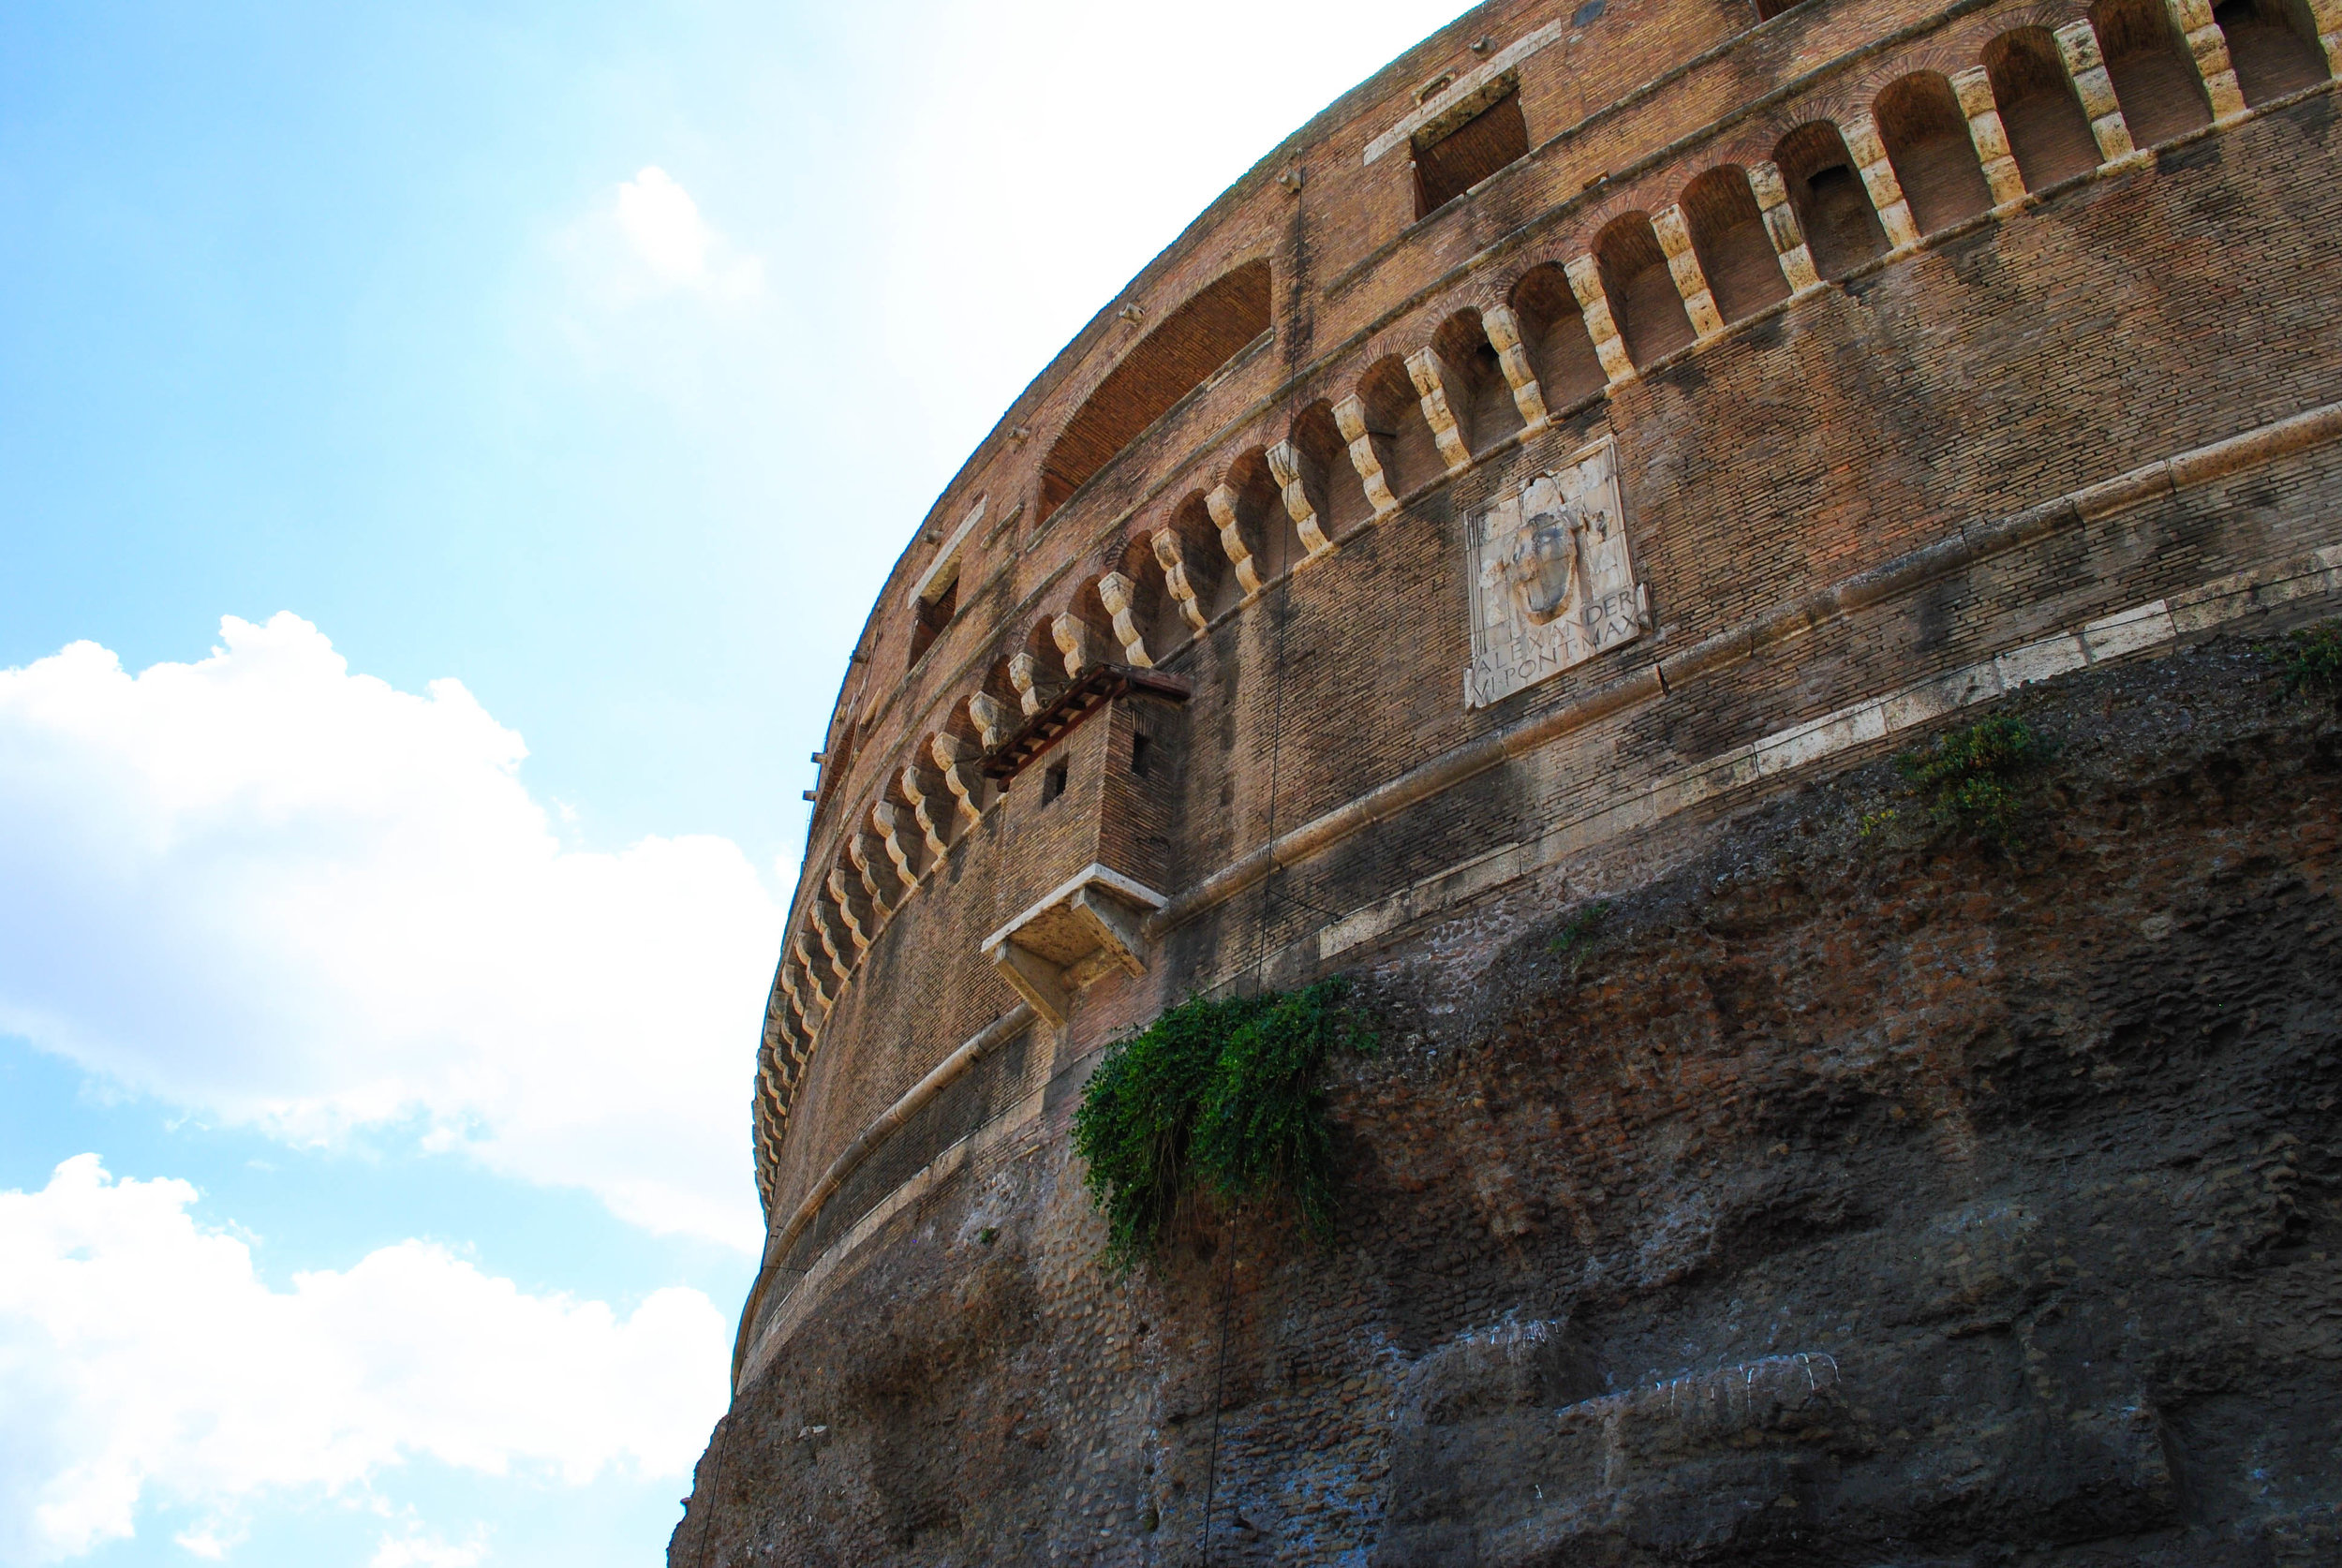 Castel Sant'Angelo in Rome, Italy